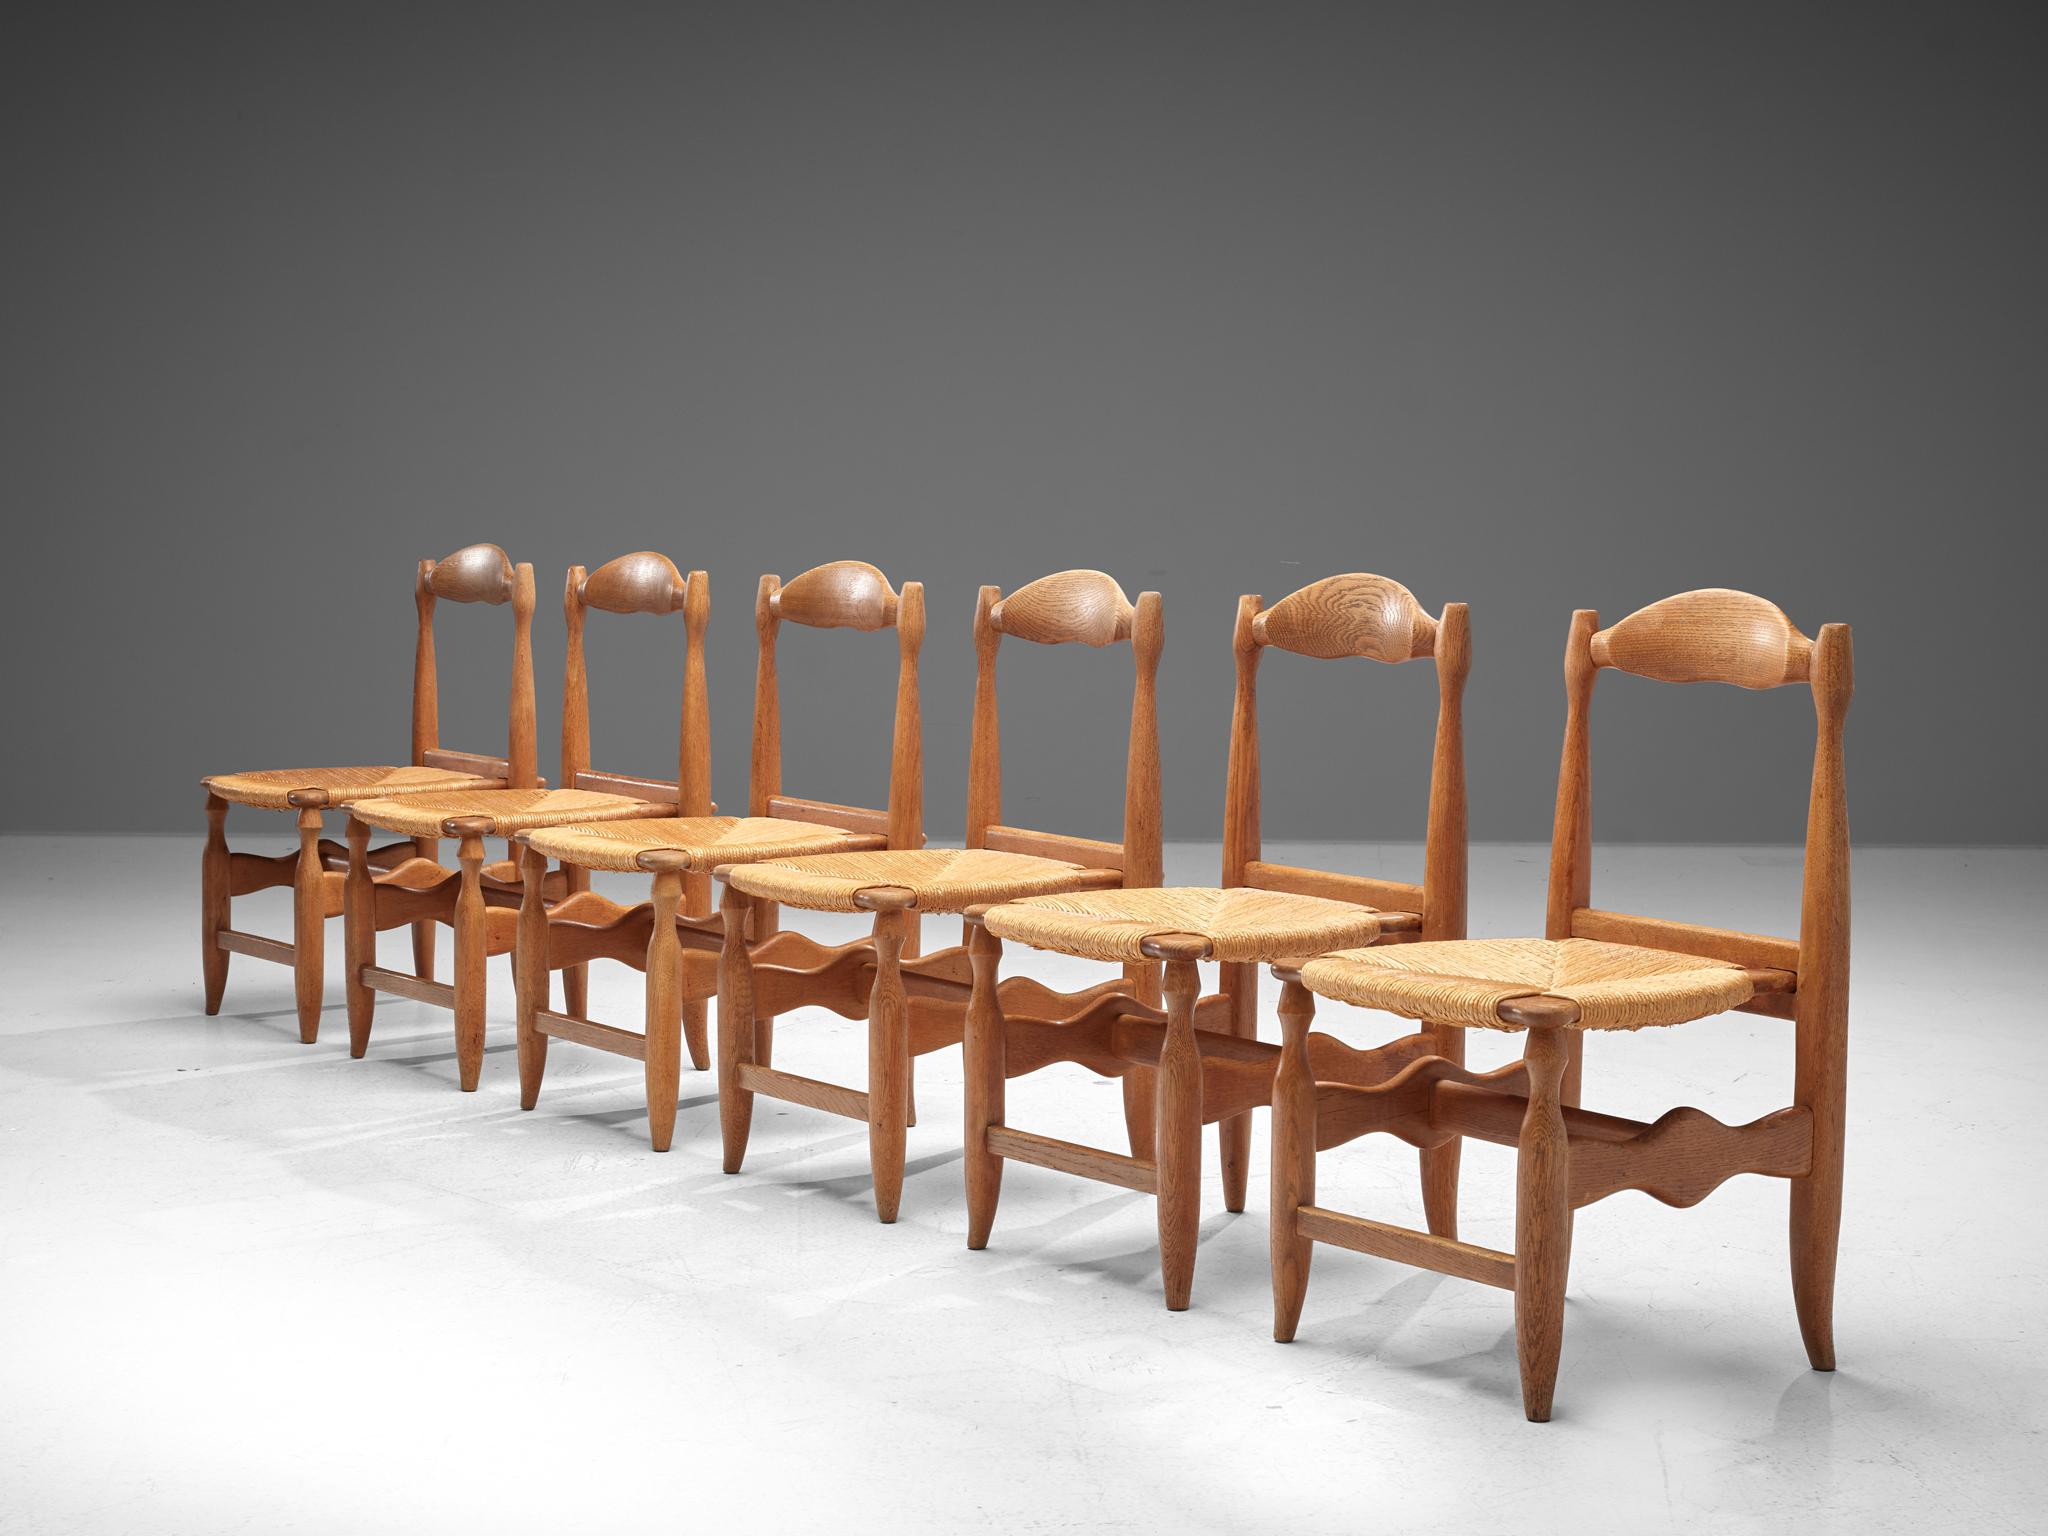 Guillerme & Chambron for Votre Maison, set of six dining chairs, oak and cane, France, 1960s.

Set of six elegant dining chairs in solid oak by Guillerme and Chambron. These chairs show the characteristic frame of this French designer duo. Tapered